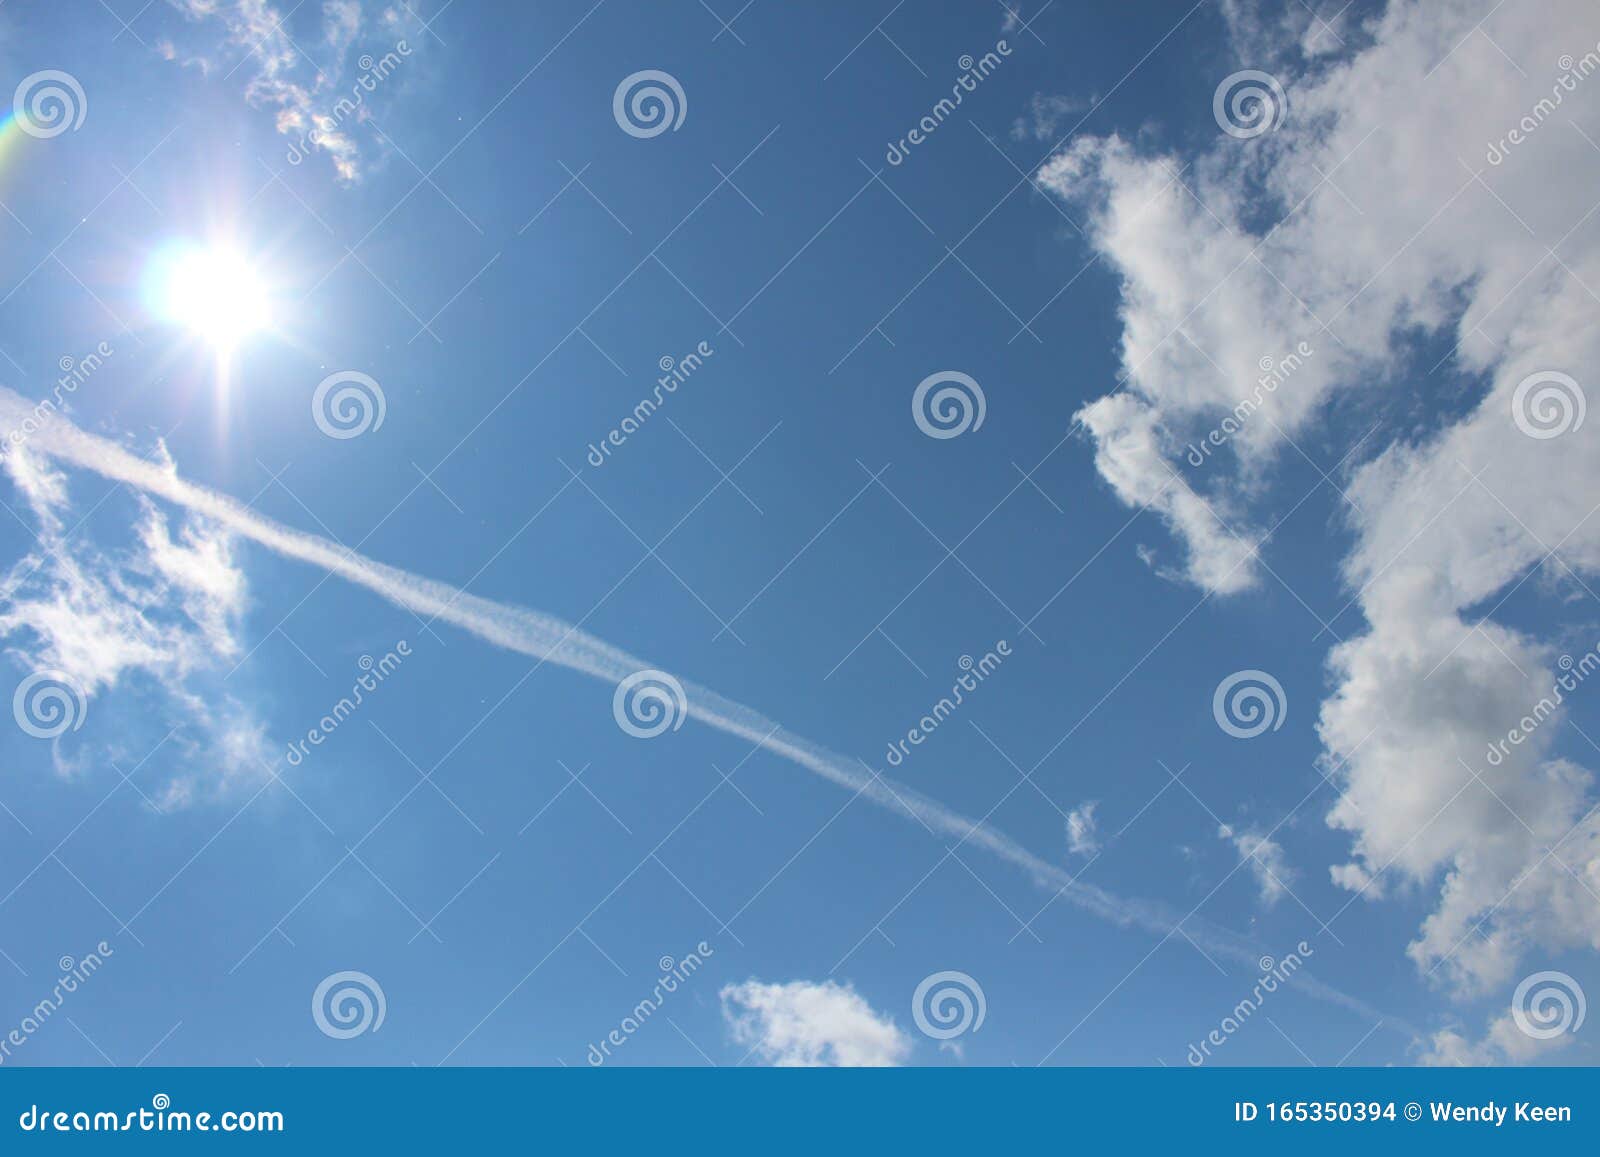 Jet stream 4 stock photo. Image of clouds, skies, right - 165350394